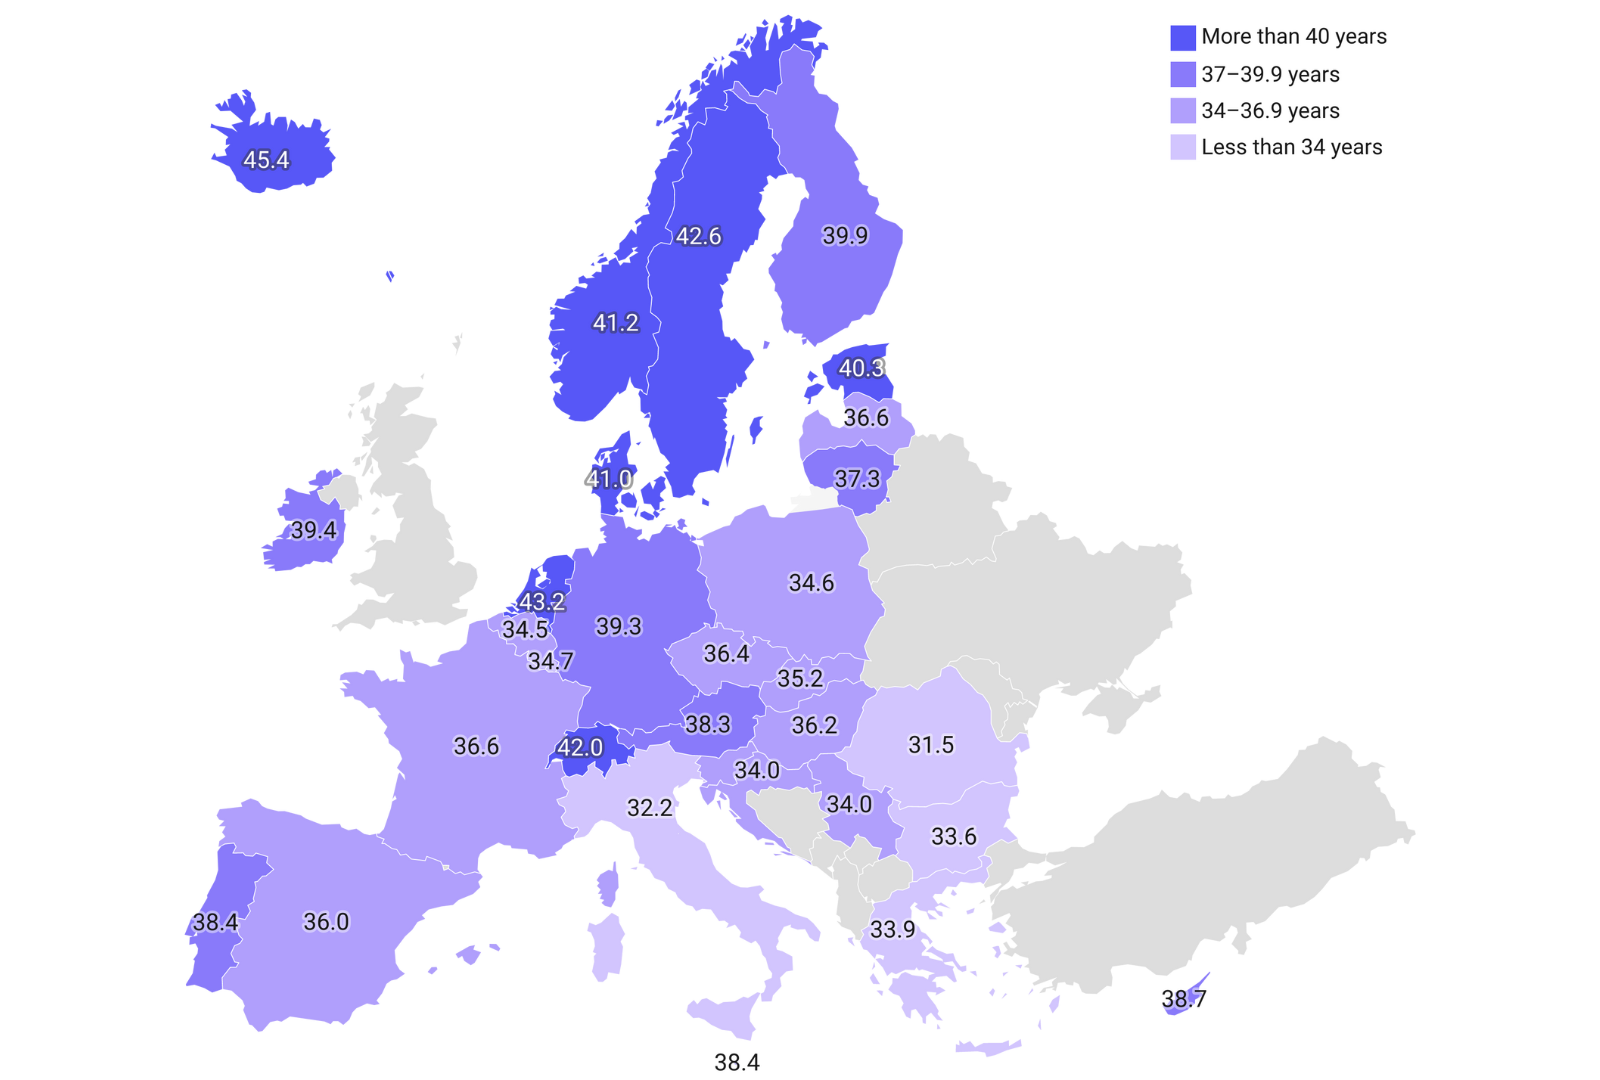 Expected Duration of Working Life in Europe 2022